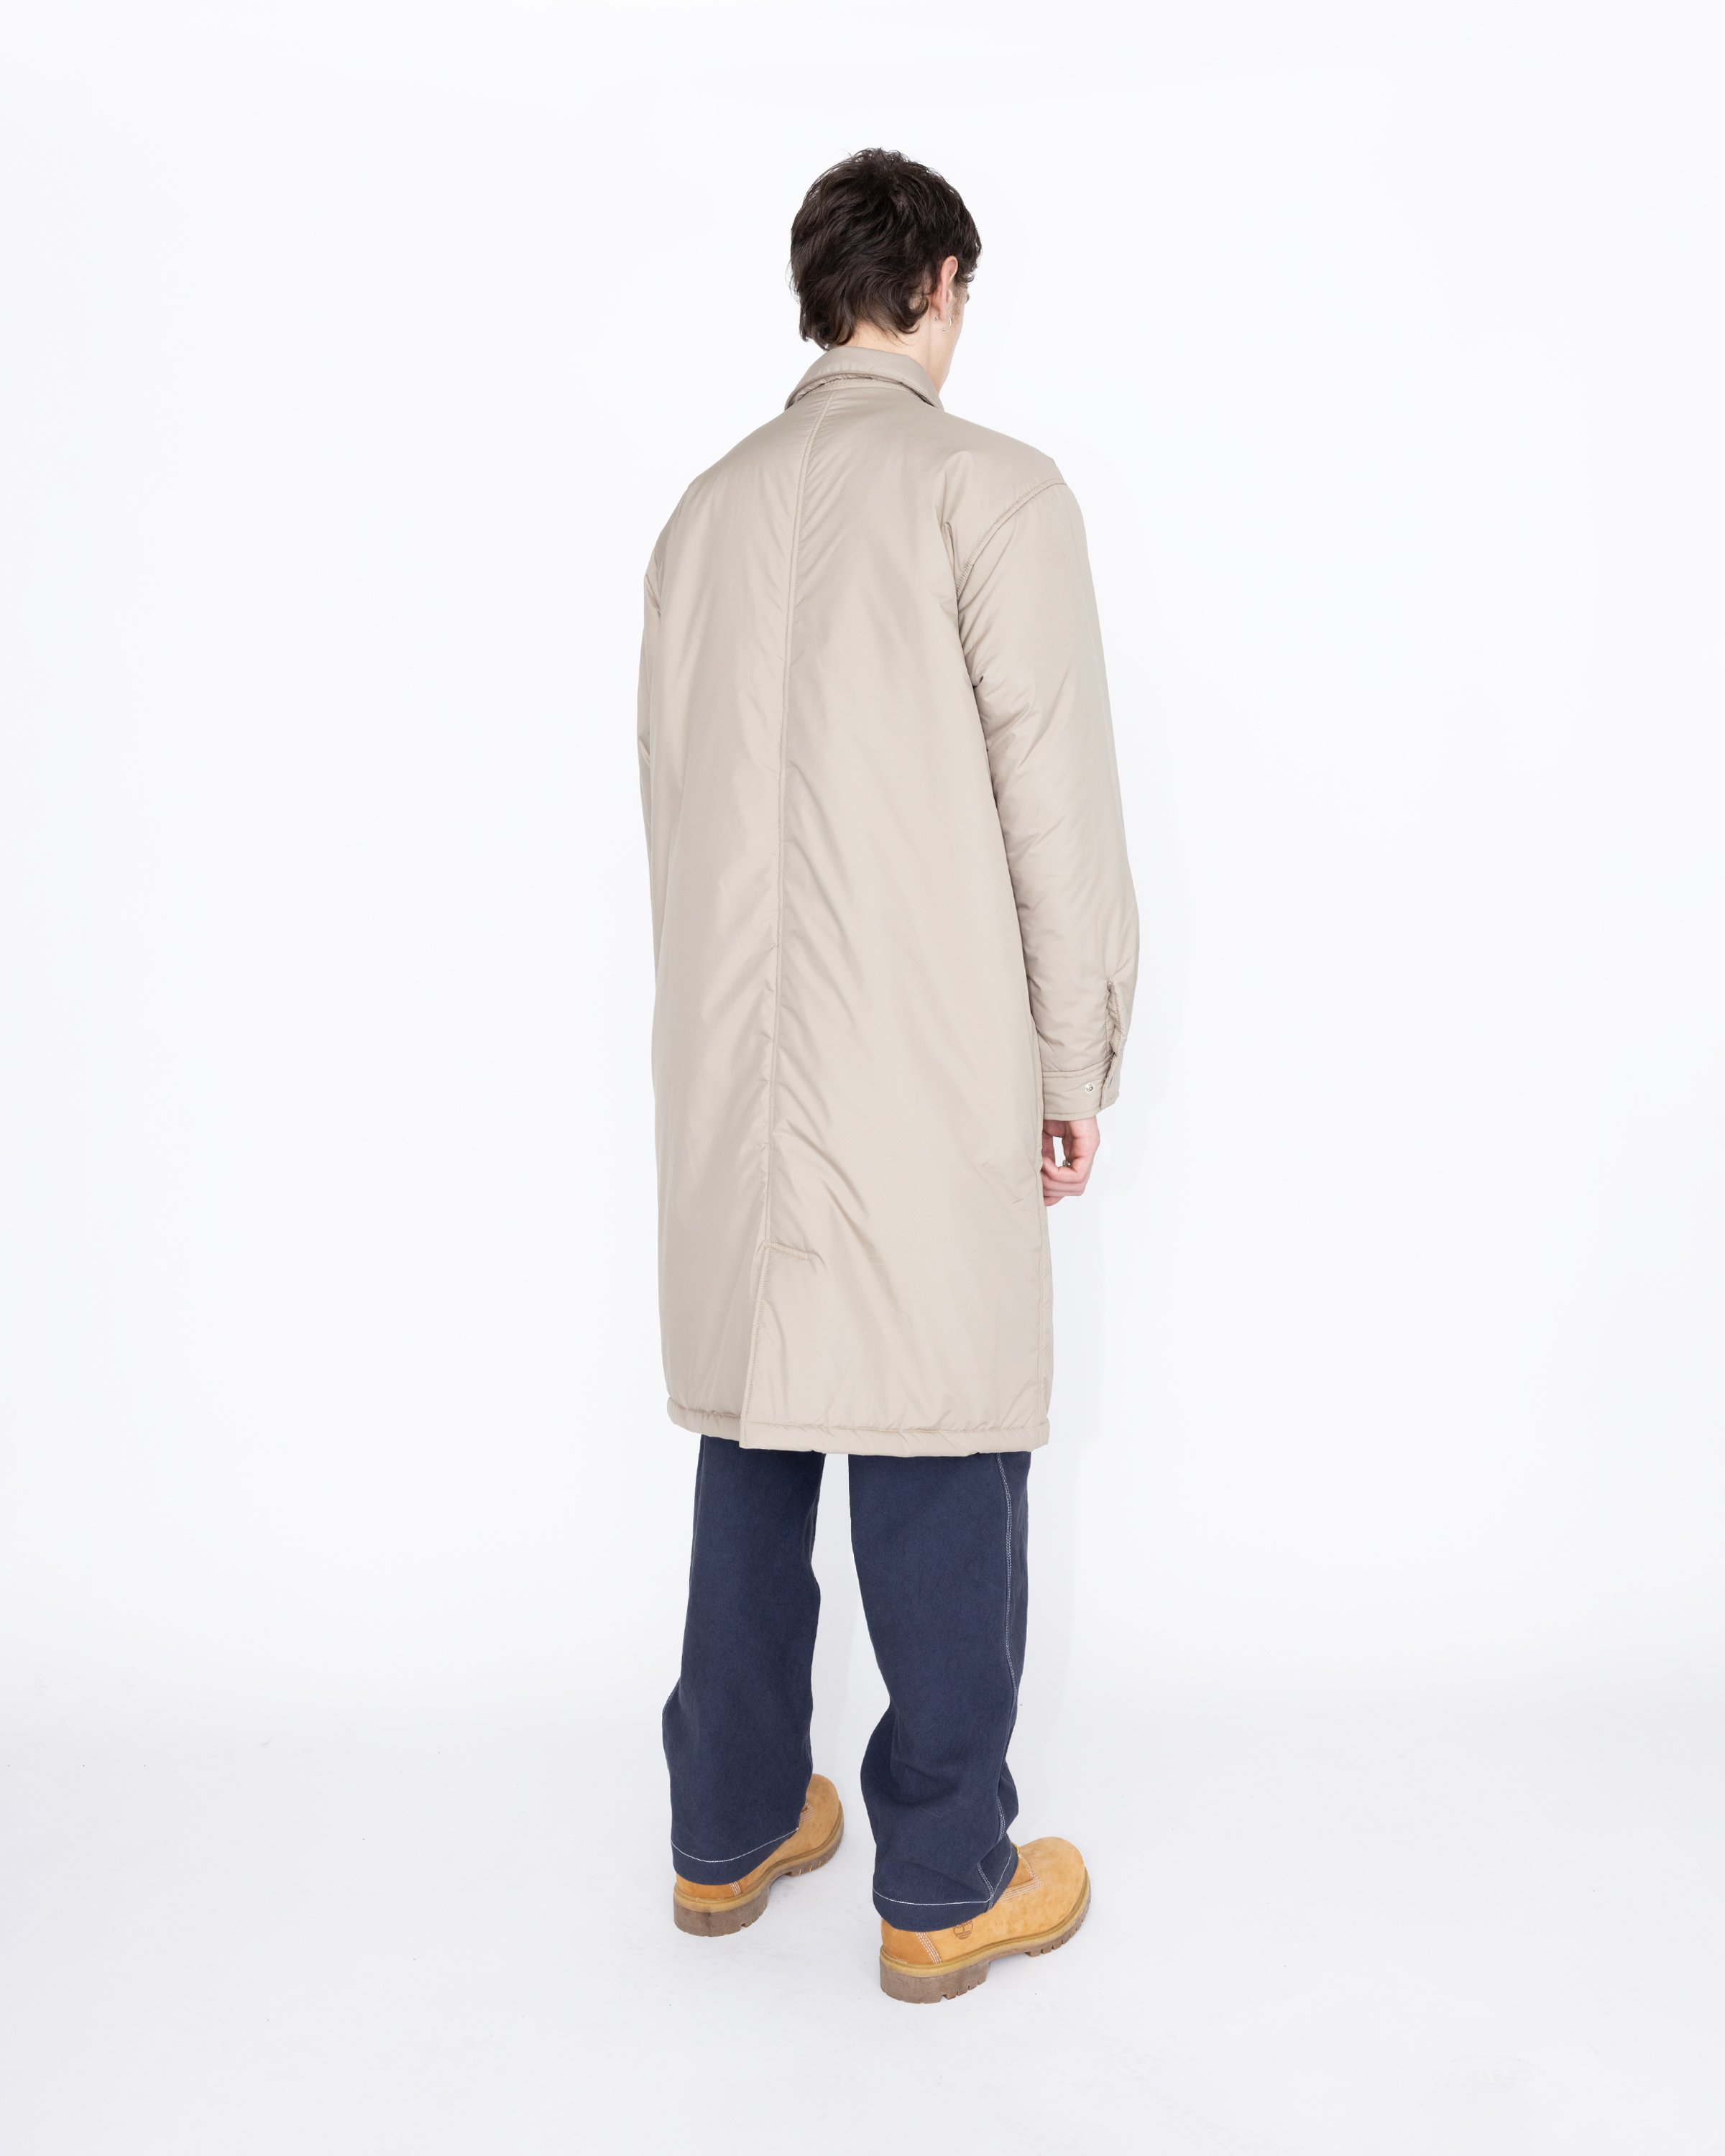 Highsnobiety HS05 - Light Insulated Eco-Poly Trench Coat Beige - Clothing - Beige - Image 5